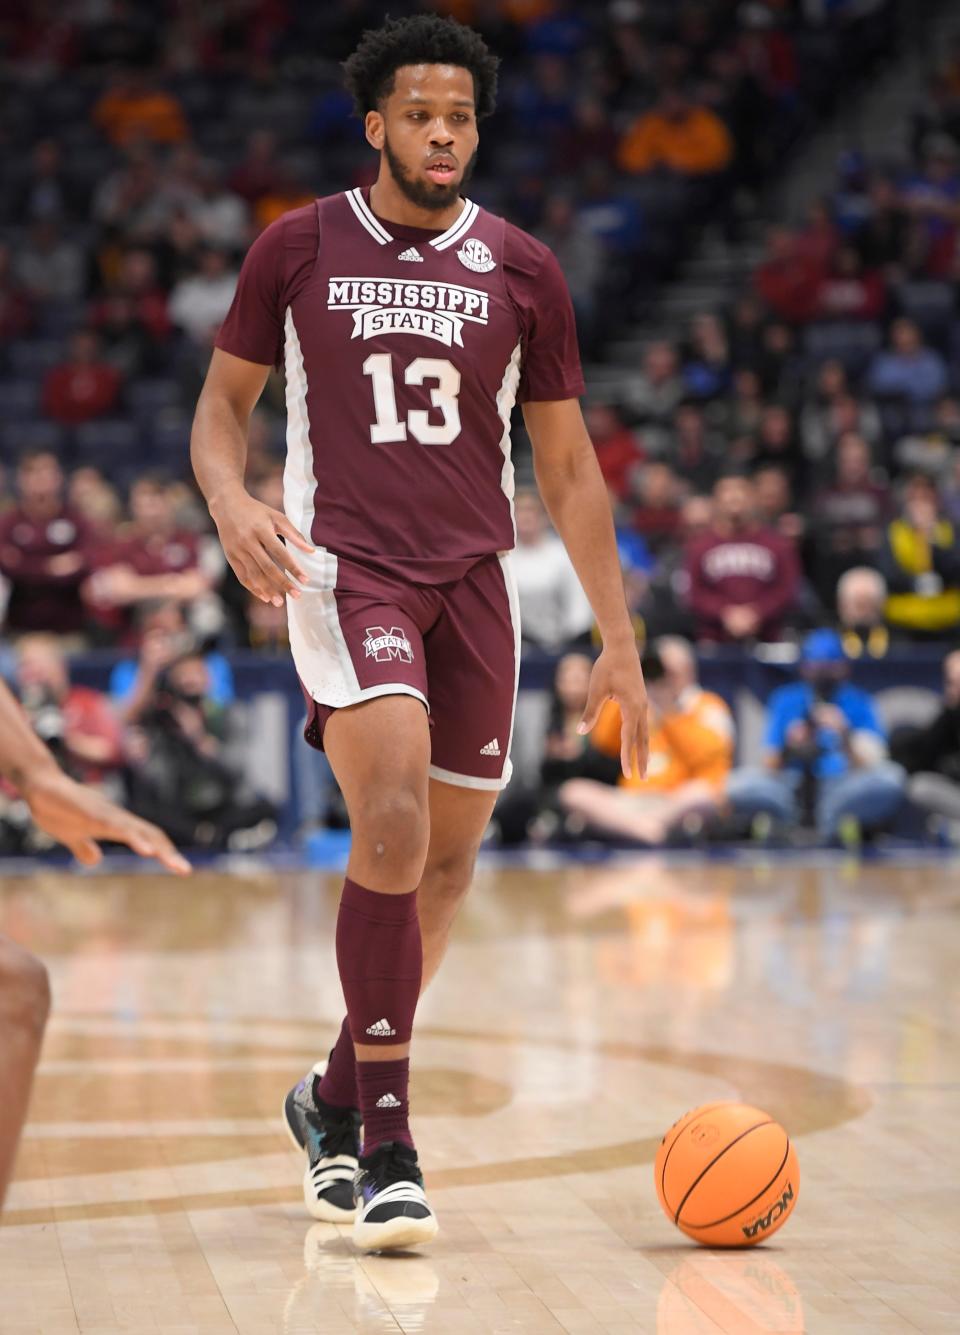 Will McNair Jr., shown playing for Mississippi State last season, had committed to Providence this summer but entered the transfer portal this week.